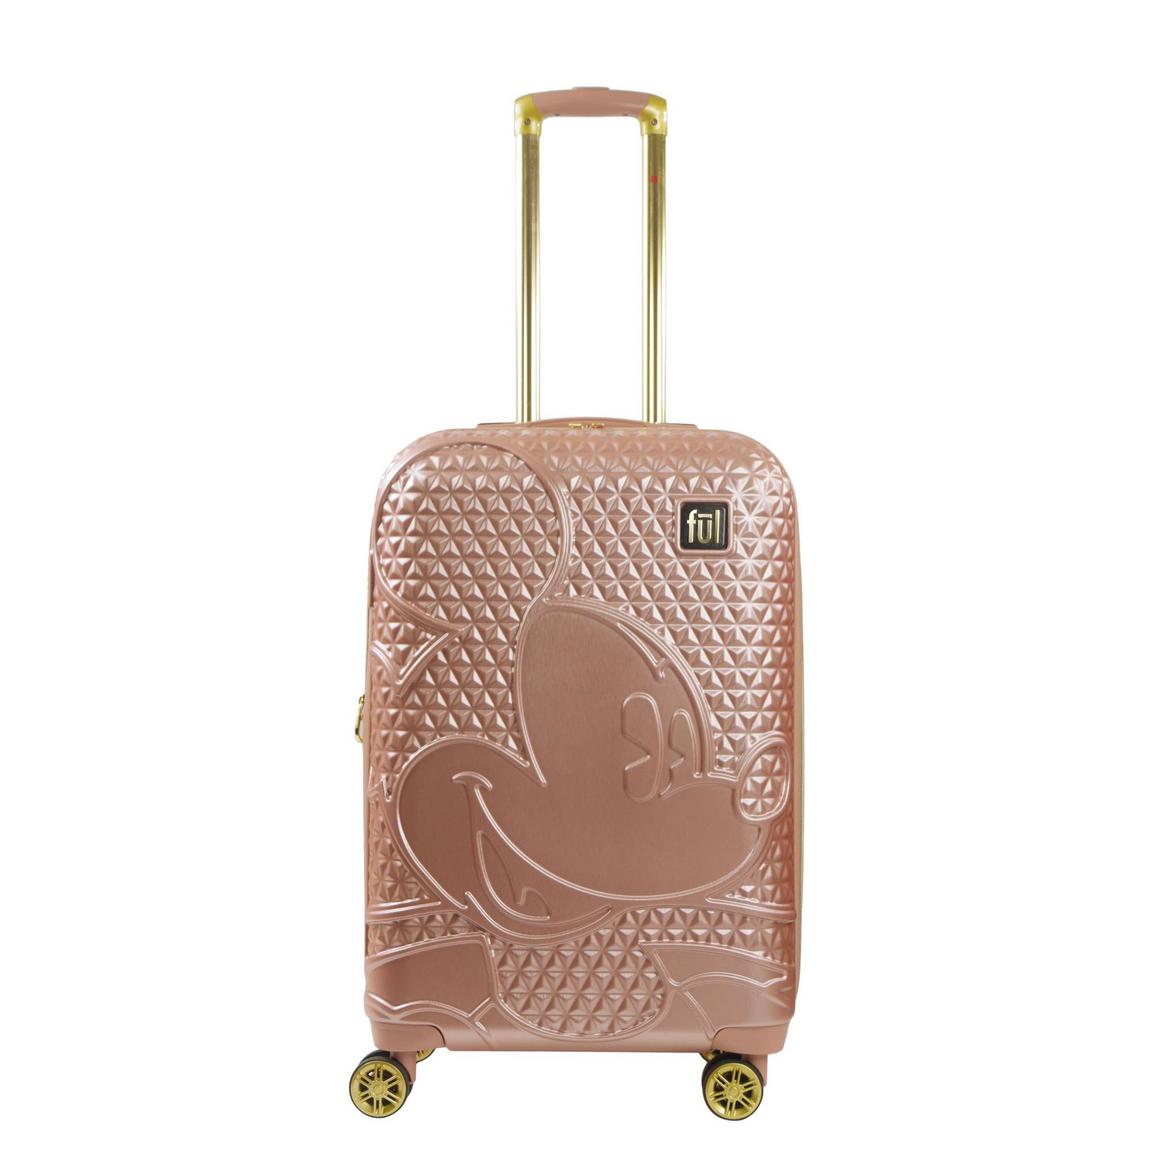 Concept One Disney FUL Mickey Mouse Textured 26-in Hard-Sided Roller Luggage - Rose Gold, Rosegold